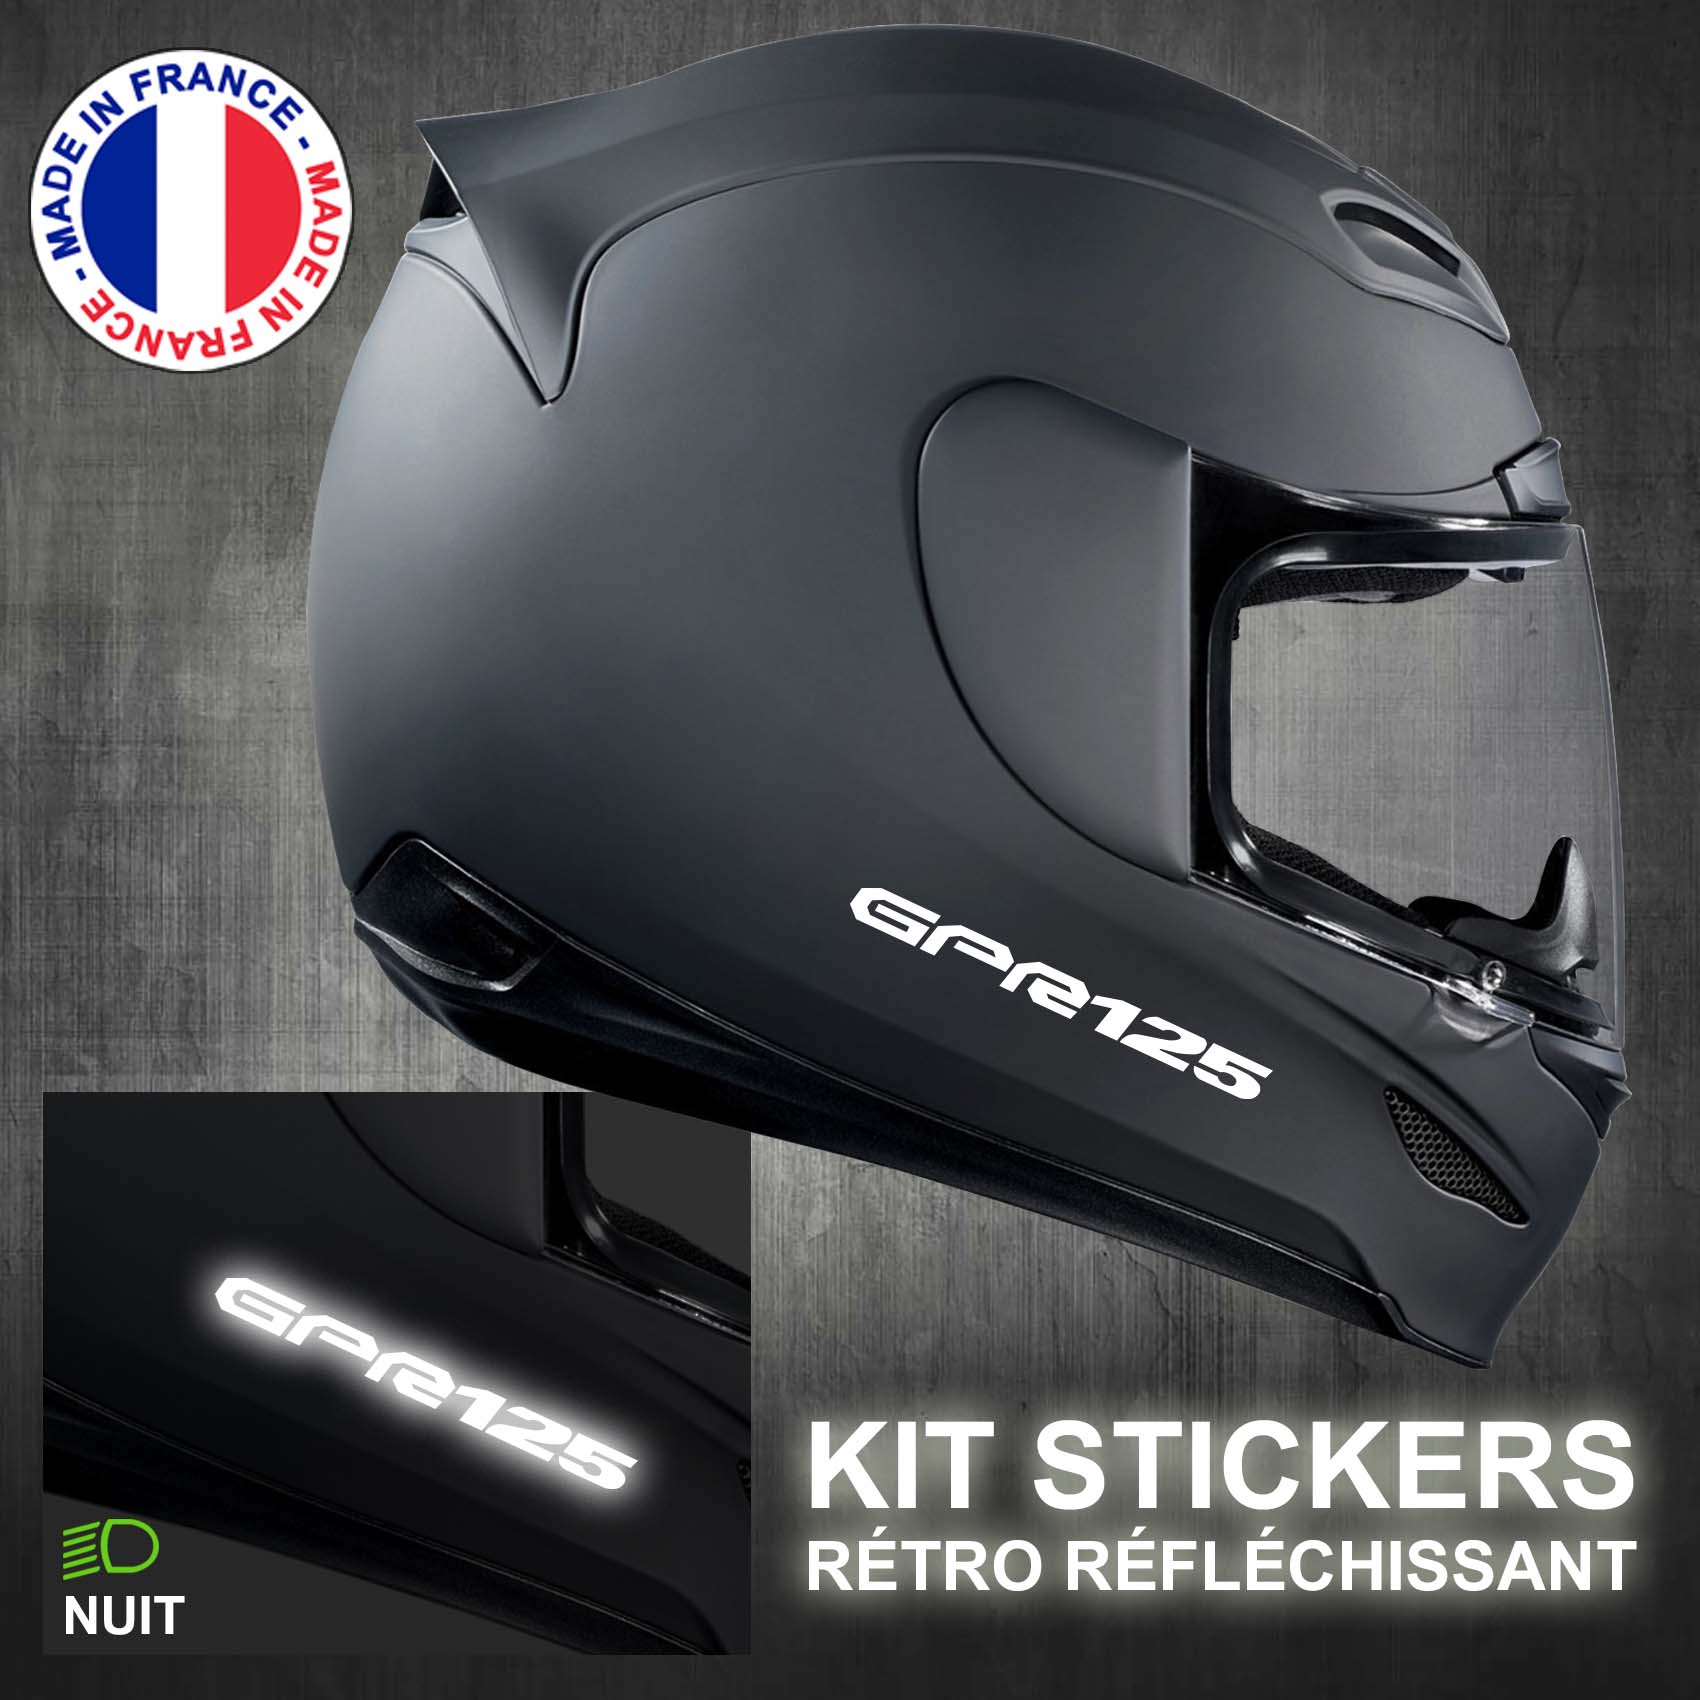 stickers-casque-moto-derbi-gpr-125-ref1-retro-reflechissant-noir-autocollant-moto-velo-tuning-racing-route-sticker-casques-adhesif-scooter-nuit-securite-decals-personnalise-personnalisable-min